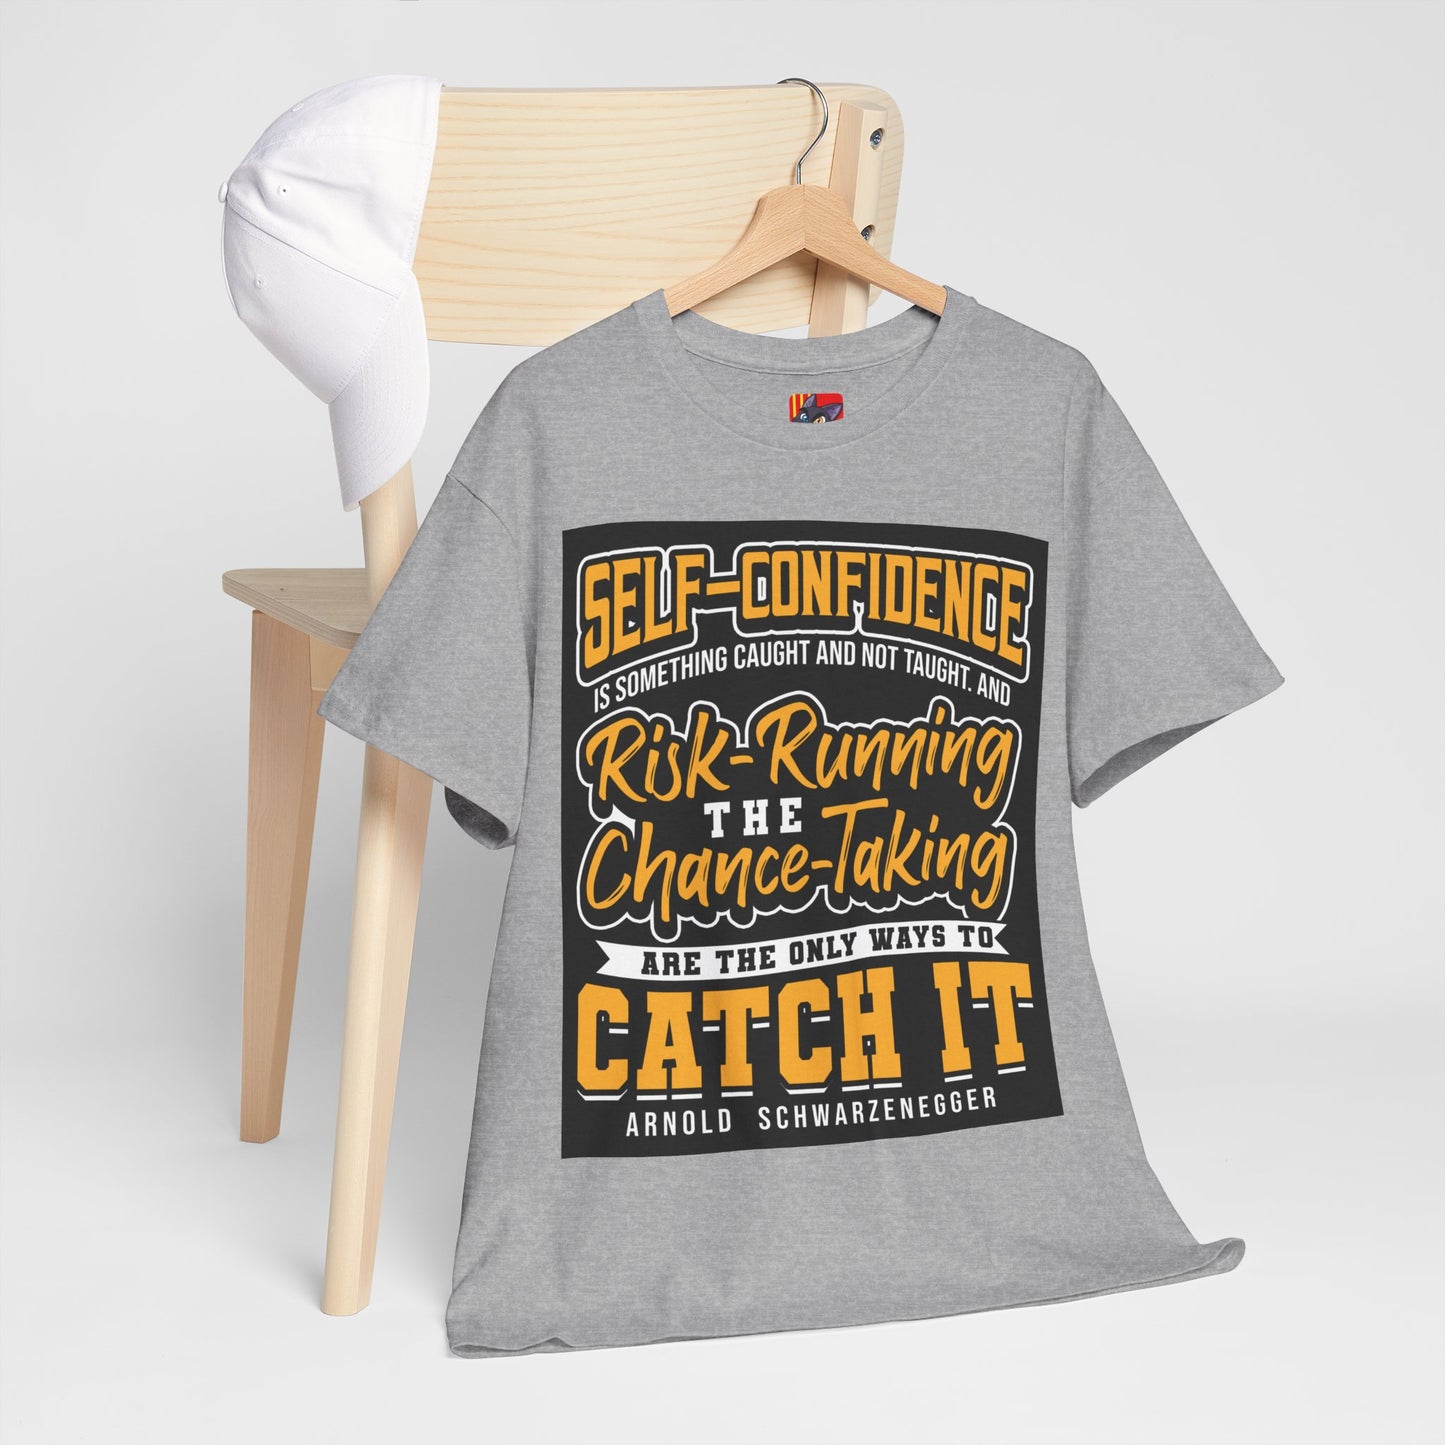 The Adaptable Achiever T-Shirt: Self-confidence is something caught and not taught